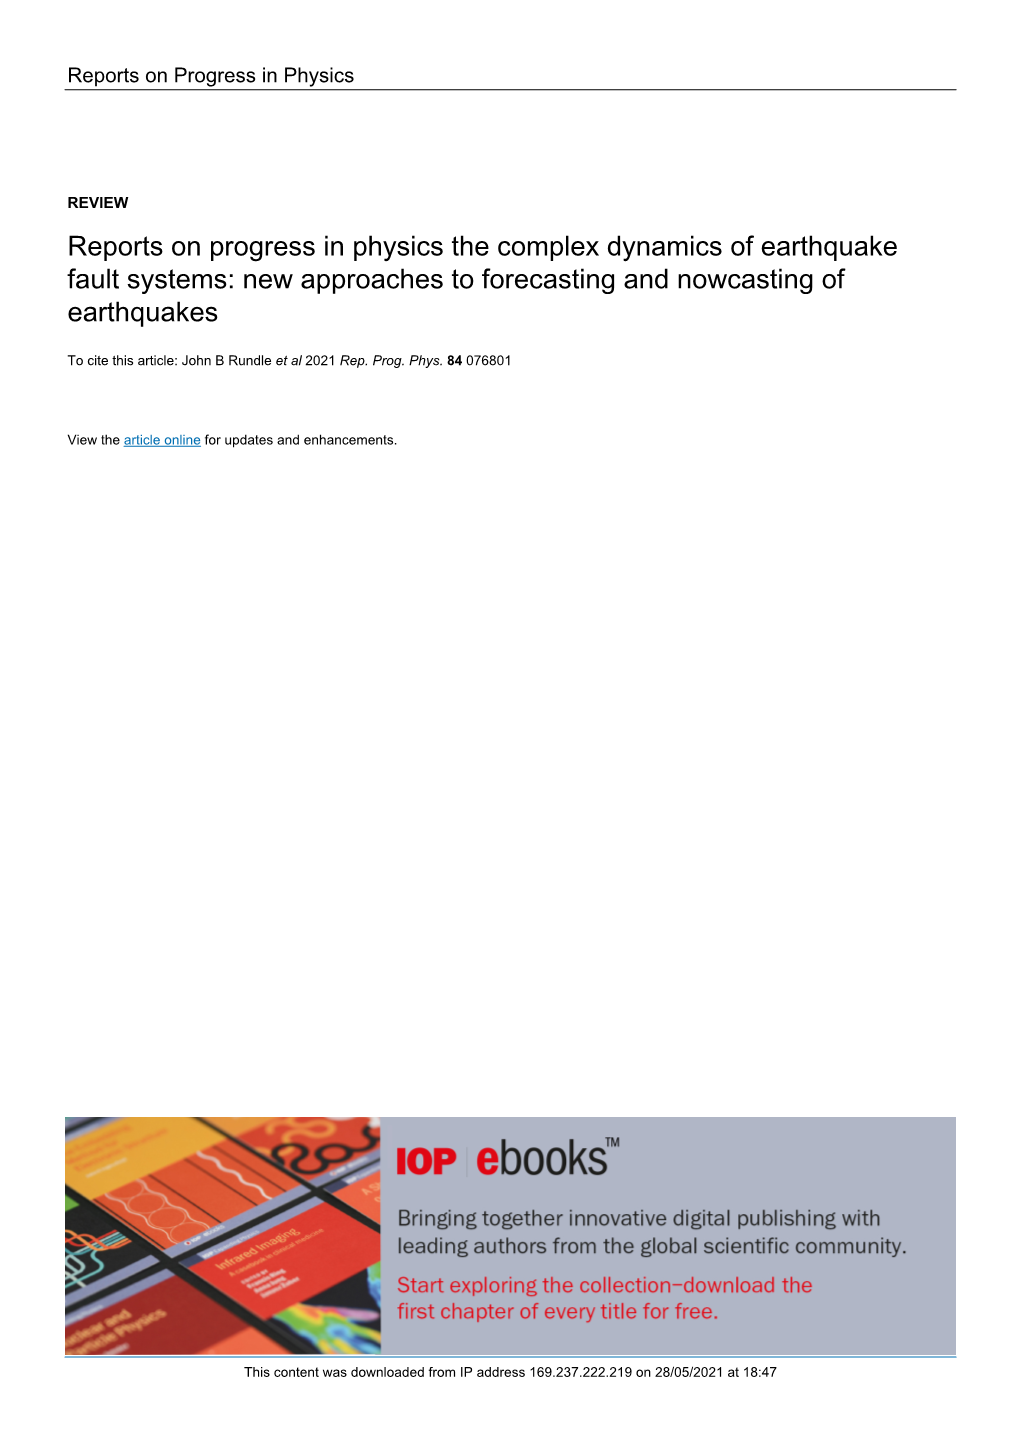 Reports on Progress in Physics the Complex Dynamics of Earthquake Fault Systems: New Approaches to Forecasting and Nowcasting of Earthquakes